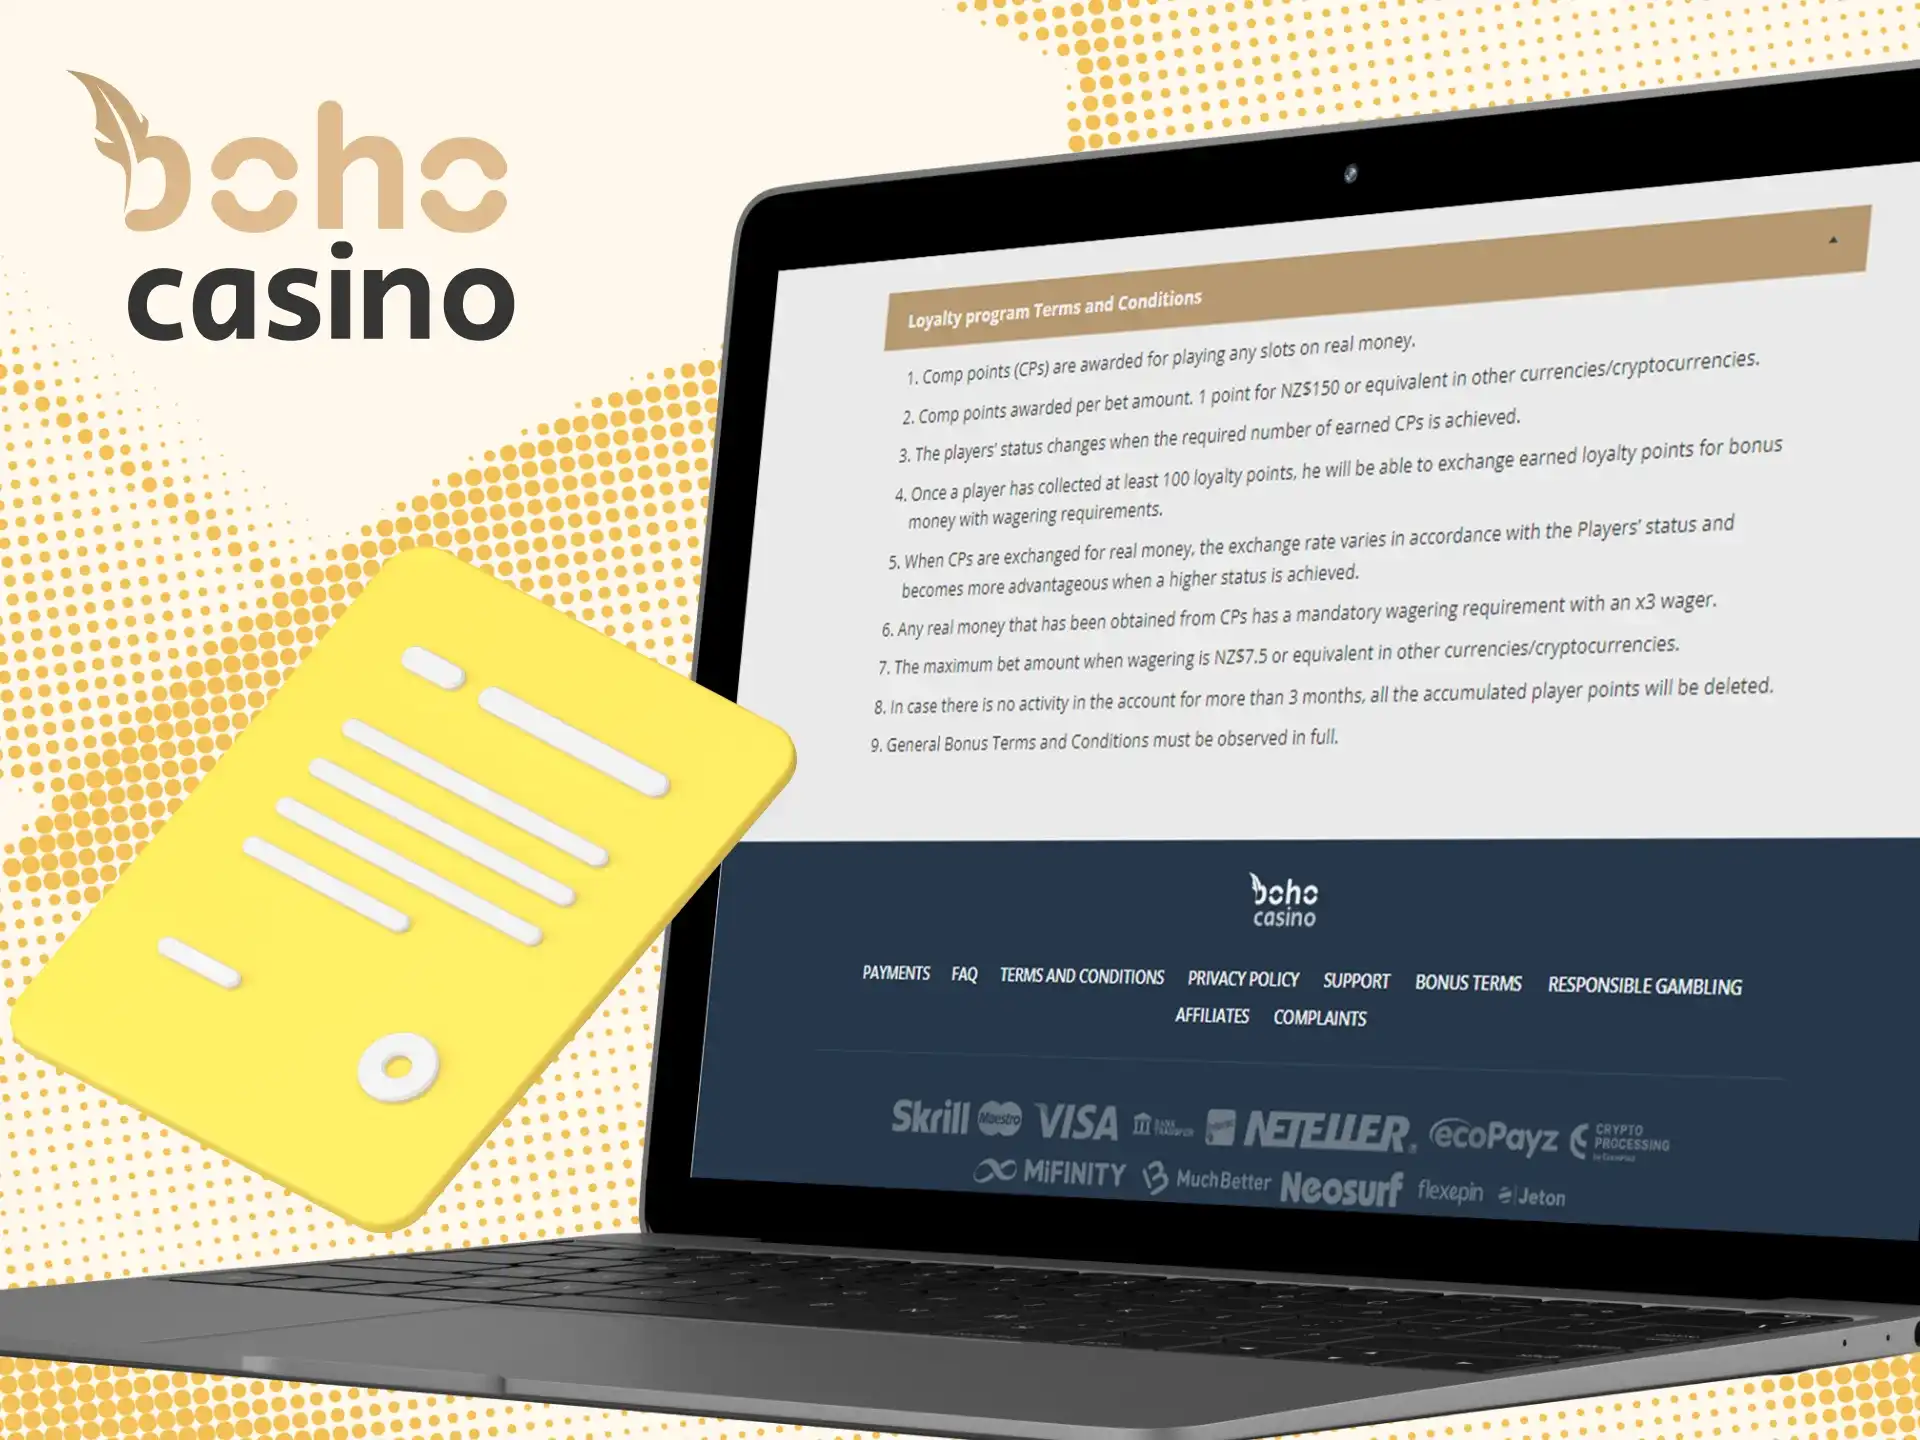 Learn about the conditions for participation in the Boho Casino VIP club.